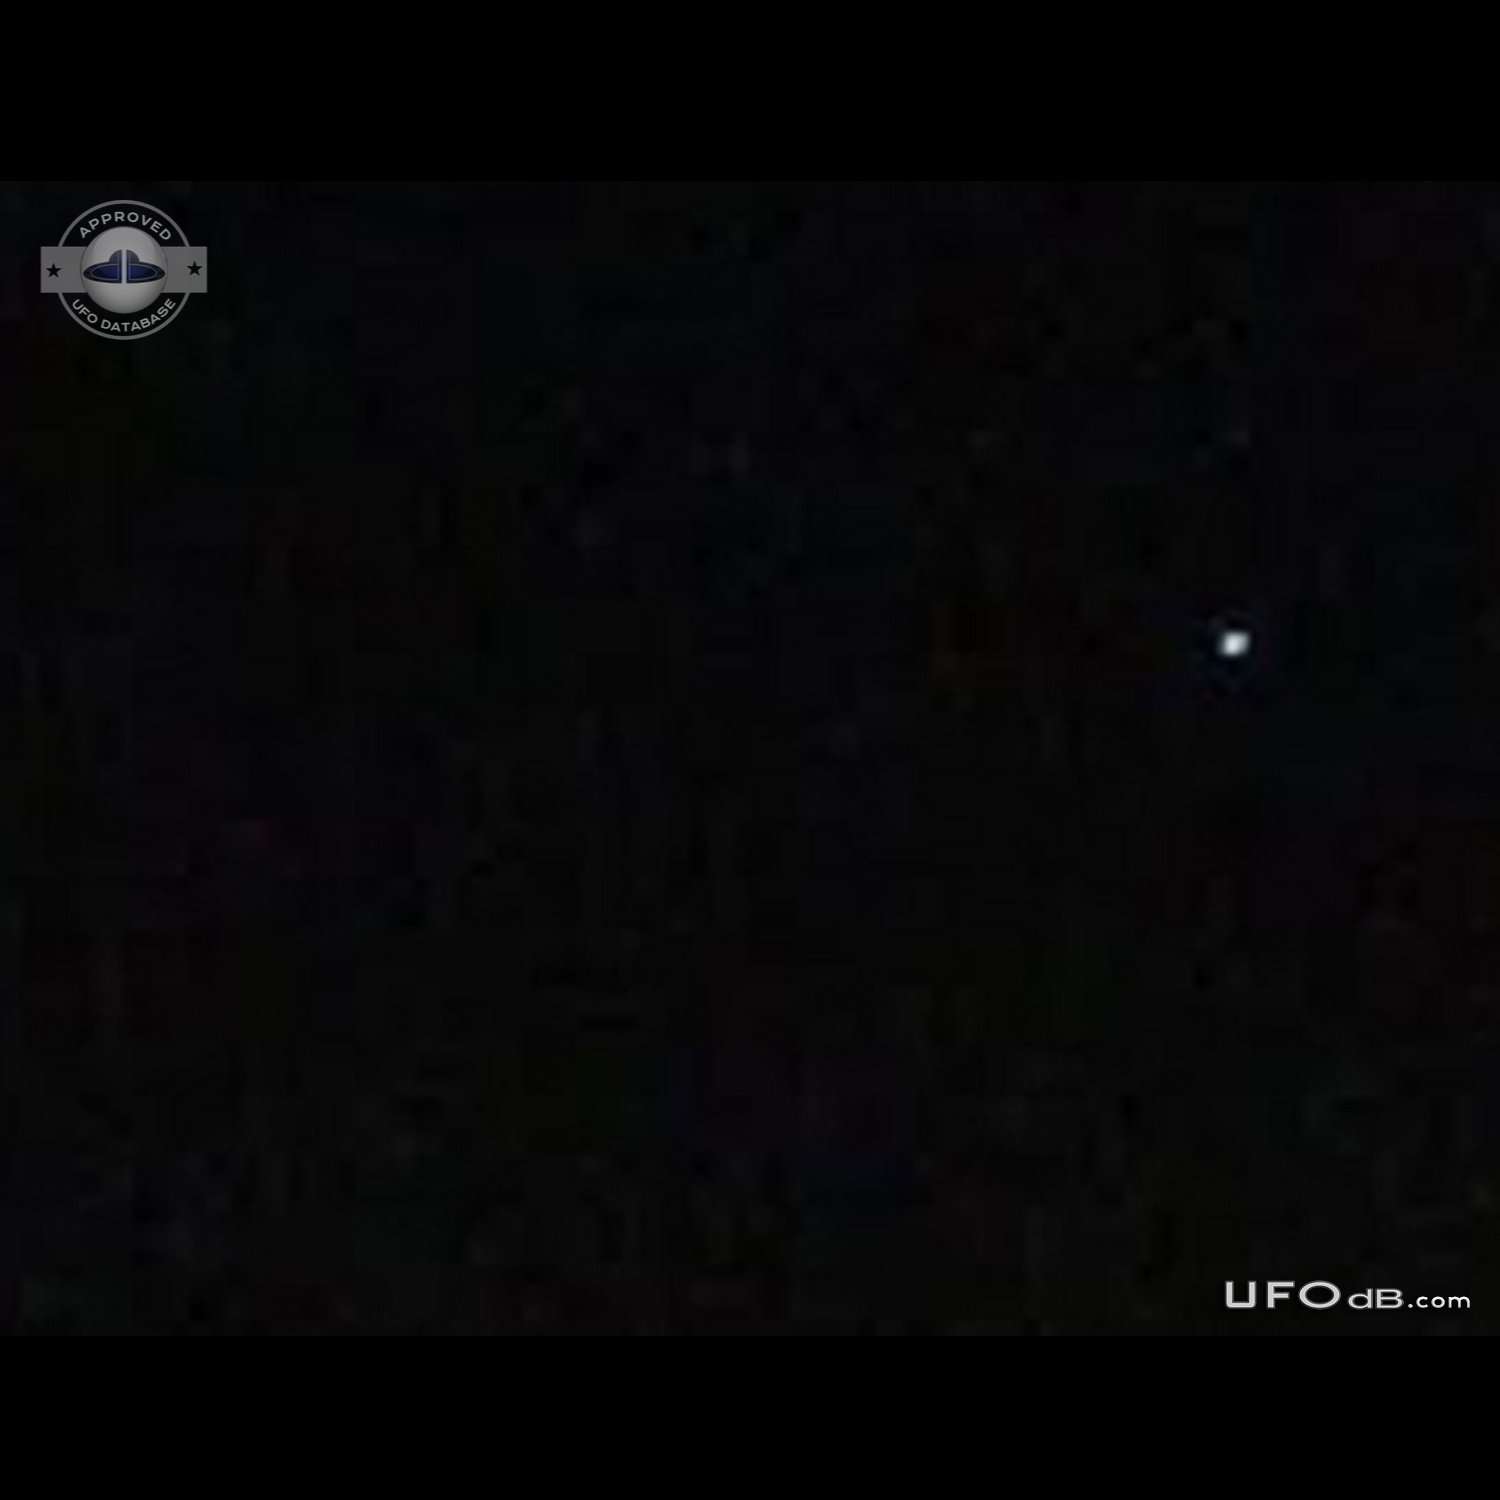 Unusual aerial UFO changed in colours over West Yorkshire UK 2015 UFO Picture #629-1